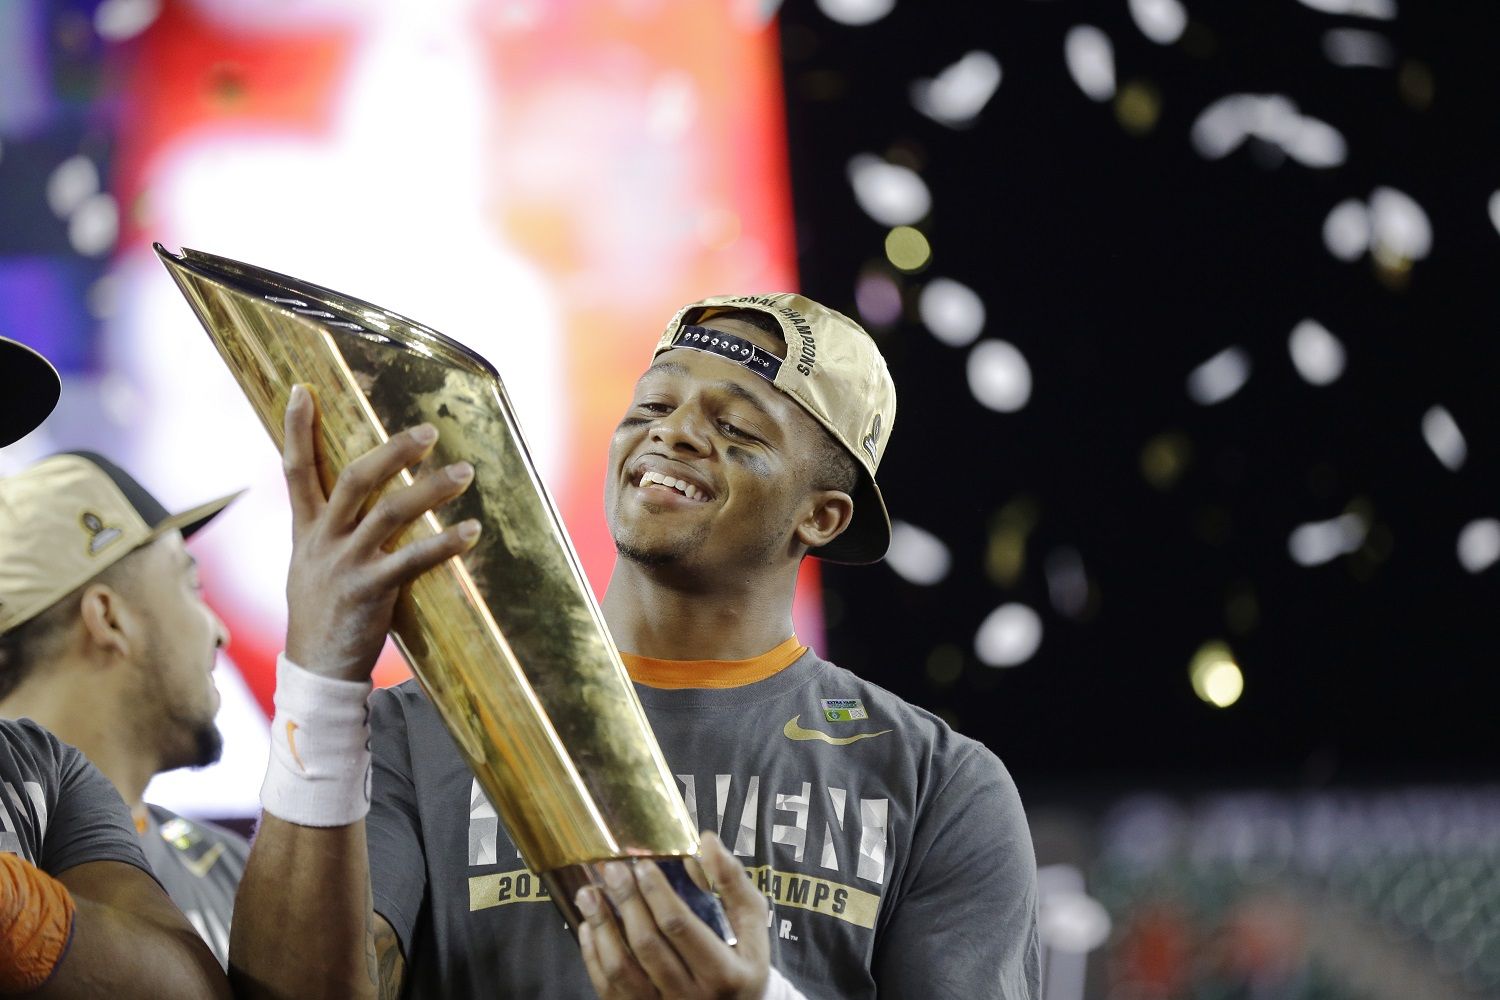 Clemson's Deshaun Watson holds up the championship trophy after the NCAA college football playoff championship game against Alabama Tuesday, Jan. 10, 2017, in Tampa, Fla. Clemson won 35-31. (AP Photo/David J. Phillip)